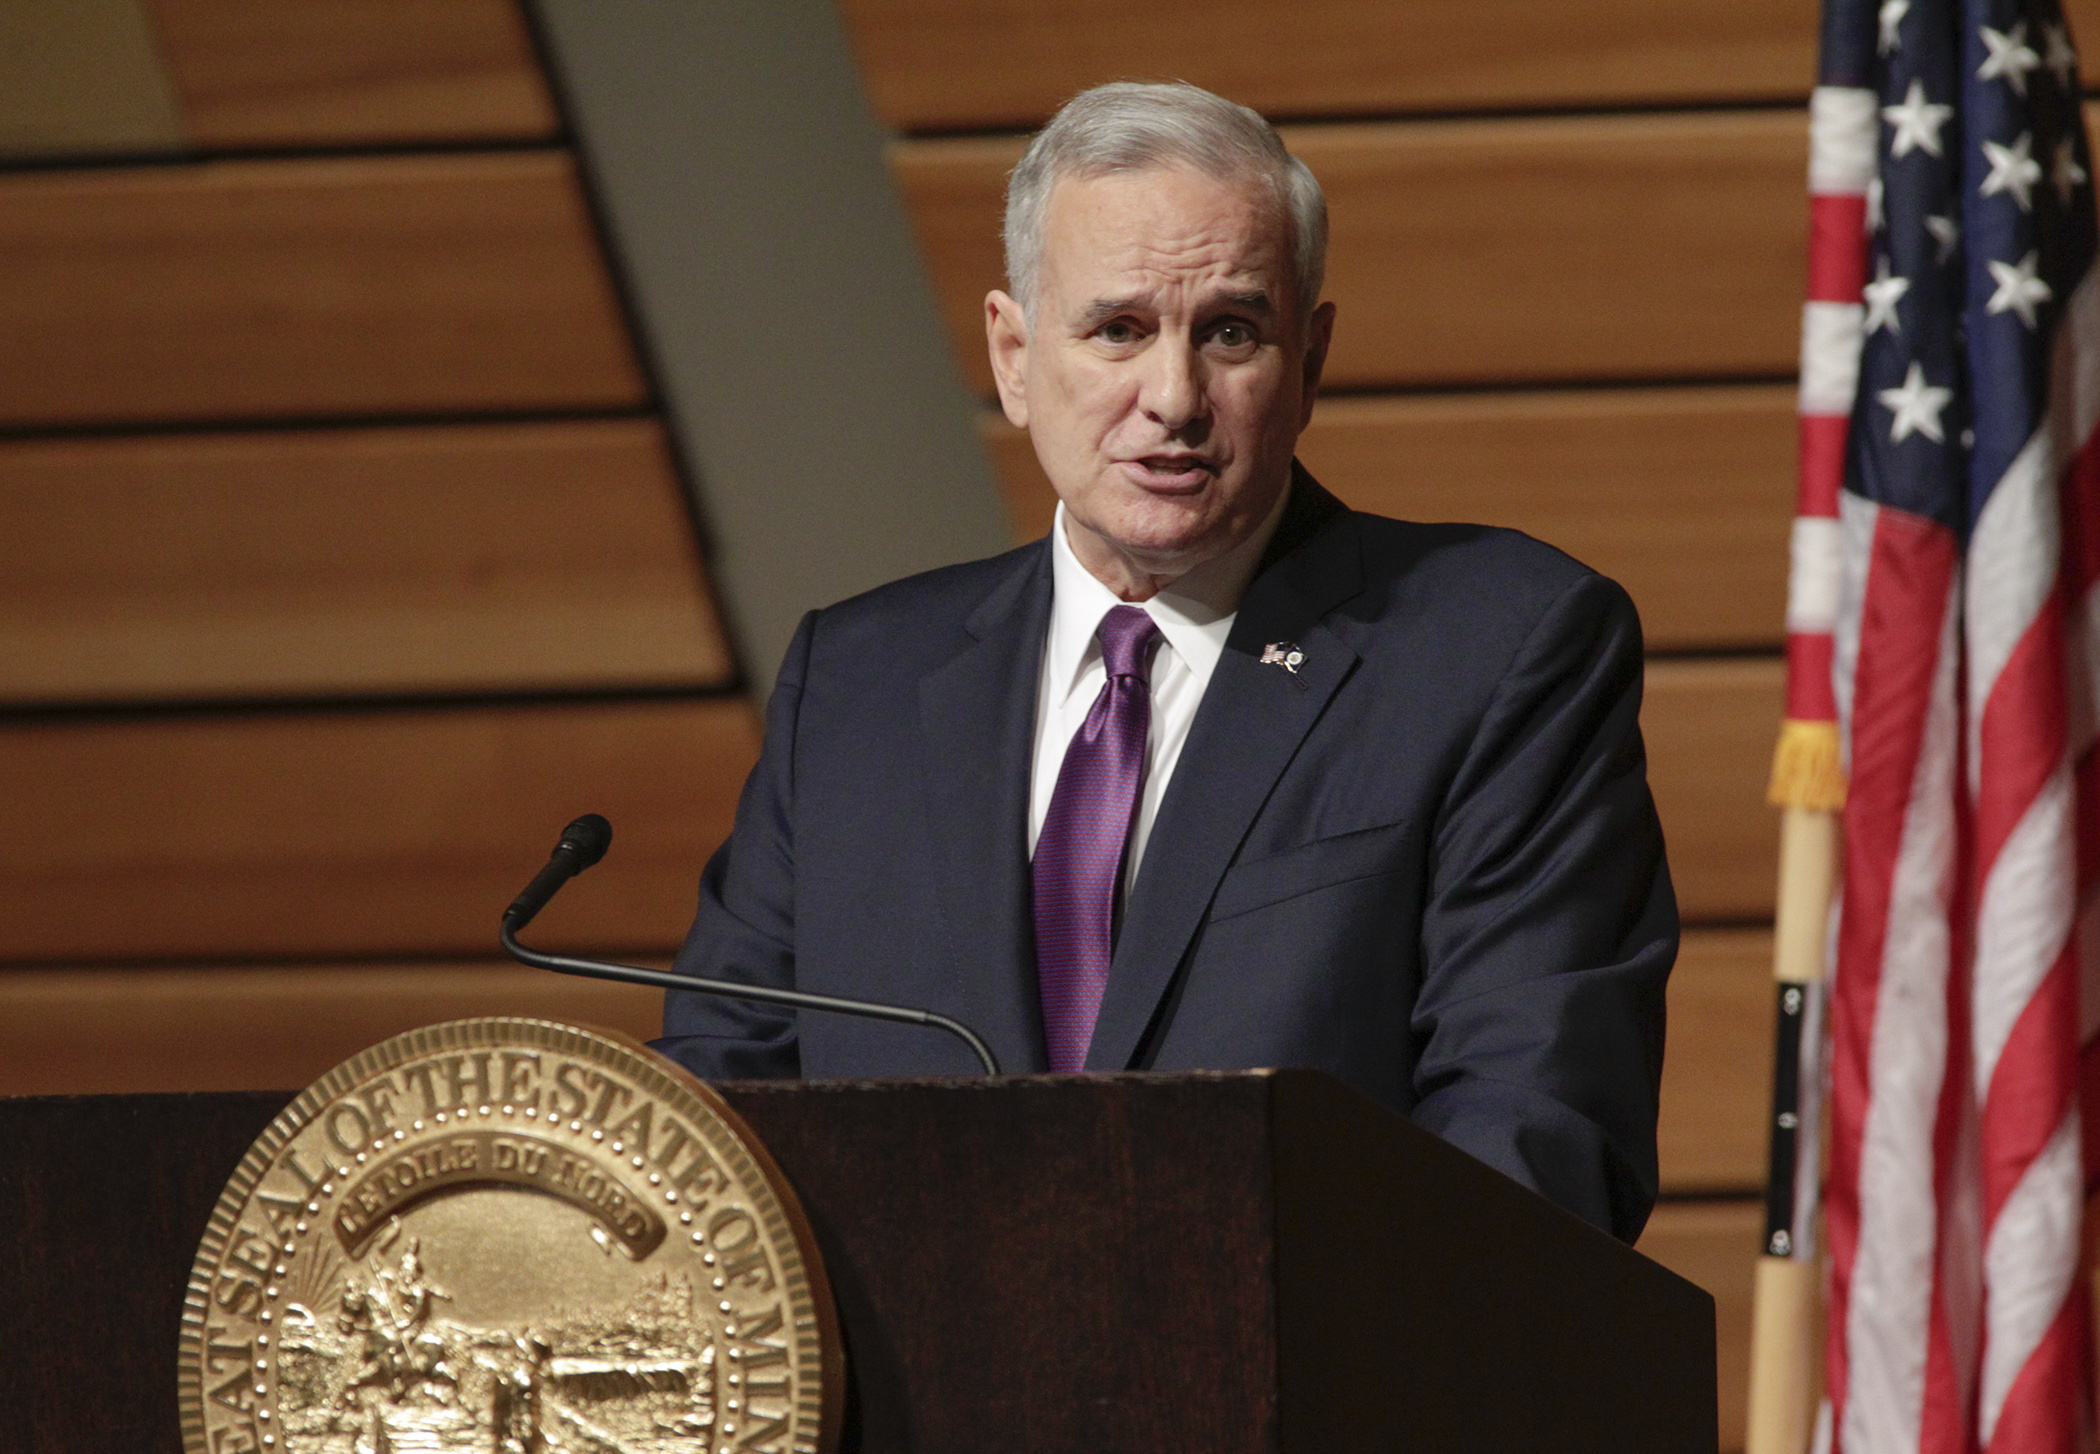 Gov. Mark Dayton delivers his State of the State address March 9 to a joint convention of the Legislature at the McNamara Alumni Center on the University of Minnesota’s Minneapolis campus. Photo by Paul Battaglia